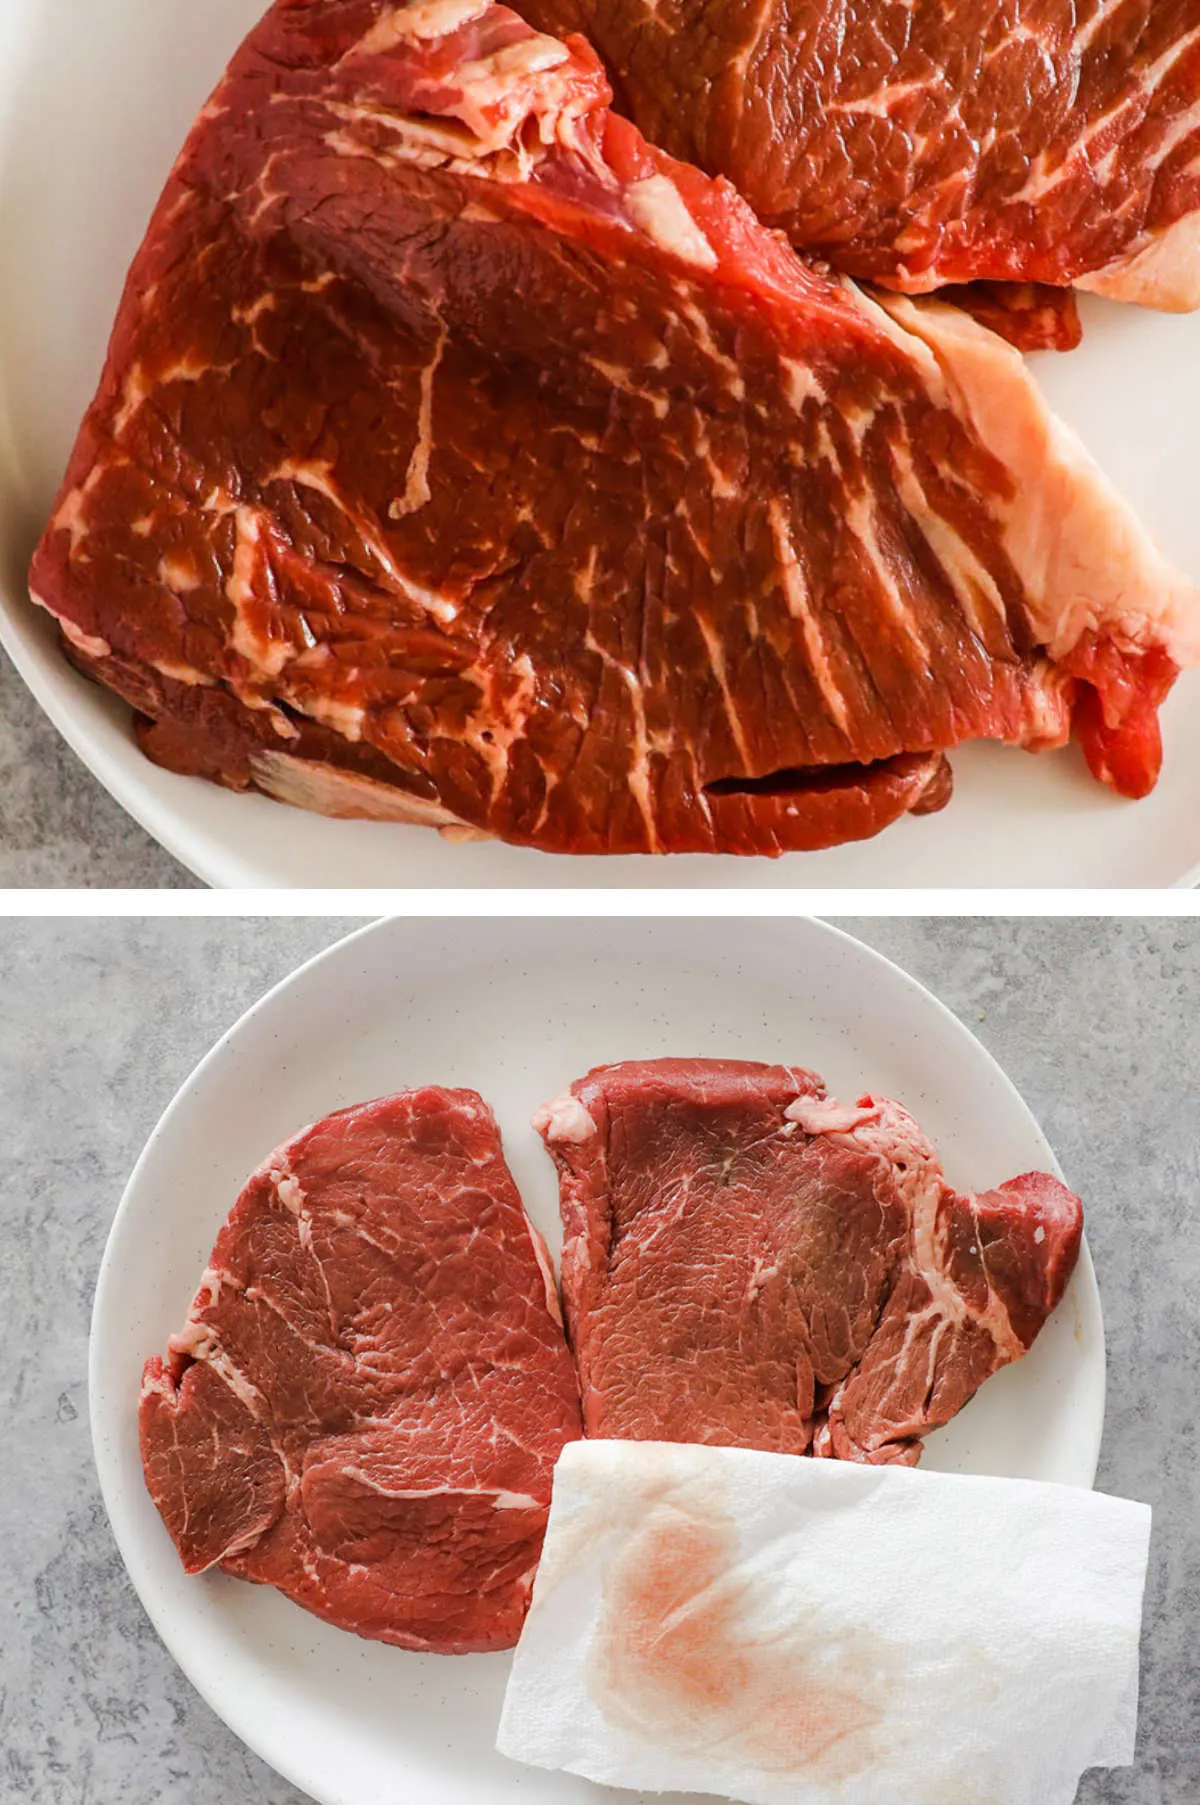 Two images in one: 1. Steaks on white plate at room temp. 2. Steaks on plate after being dried, paper towel sits on bottom right of image.